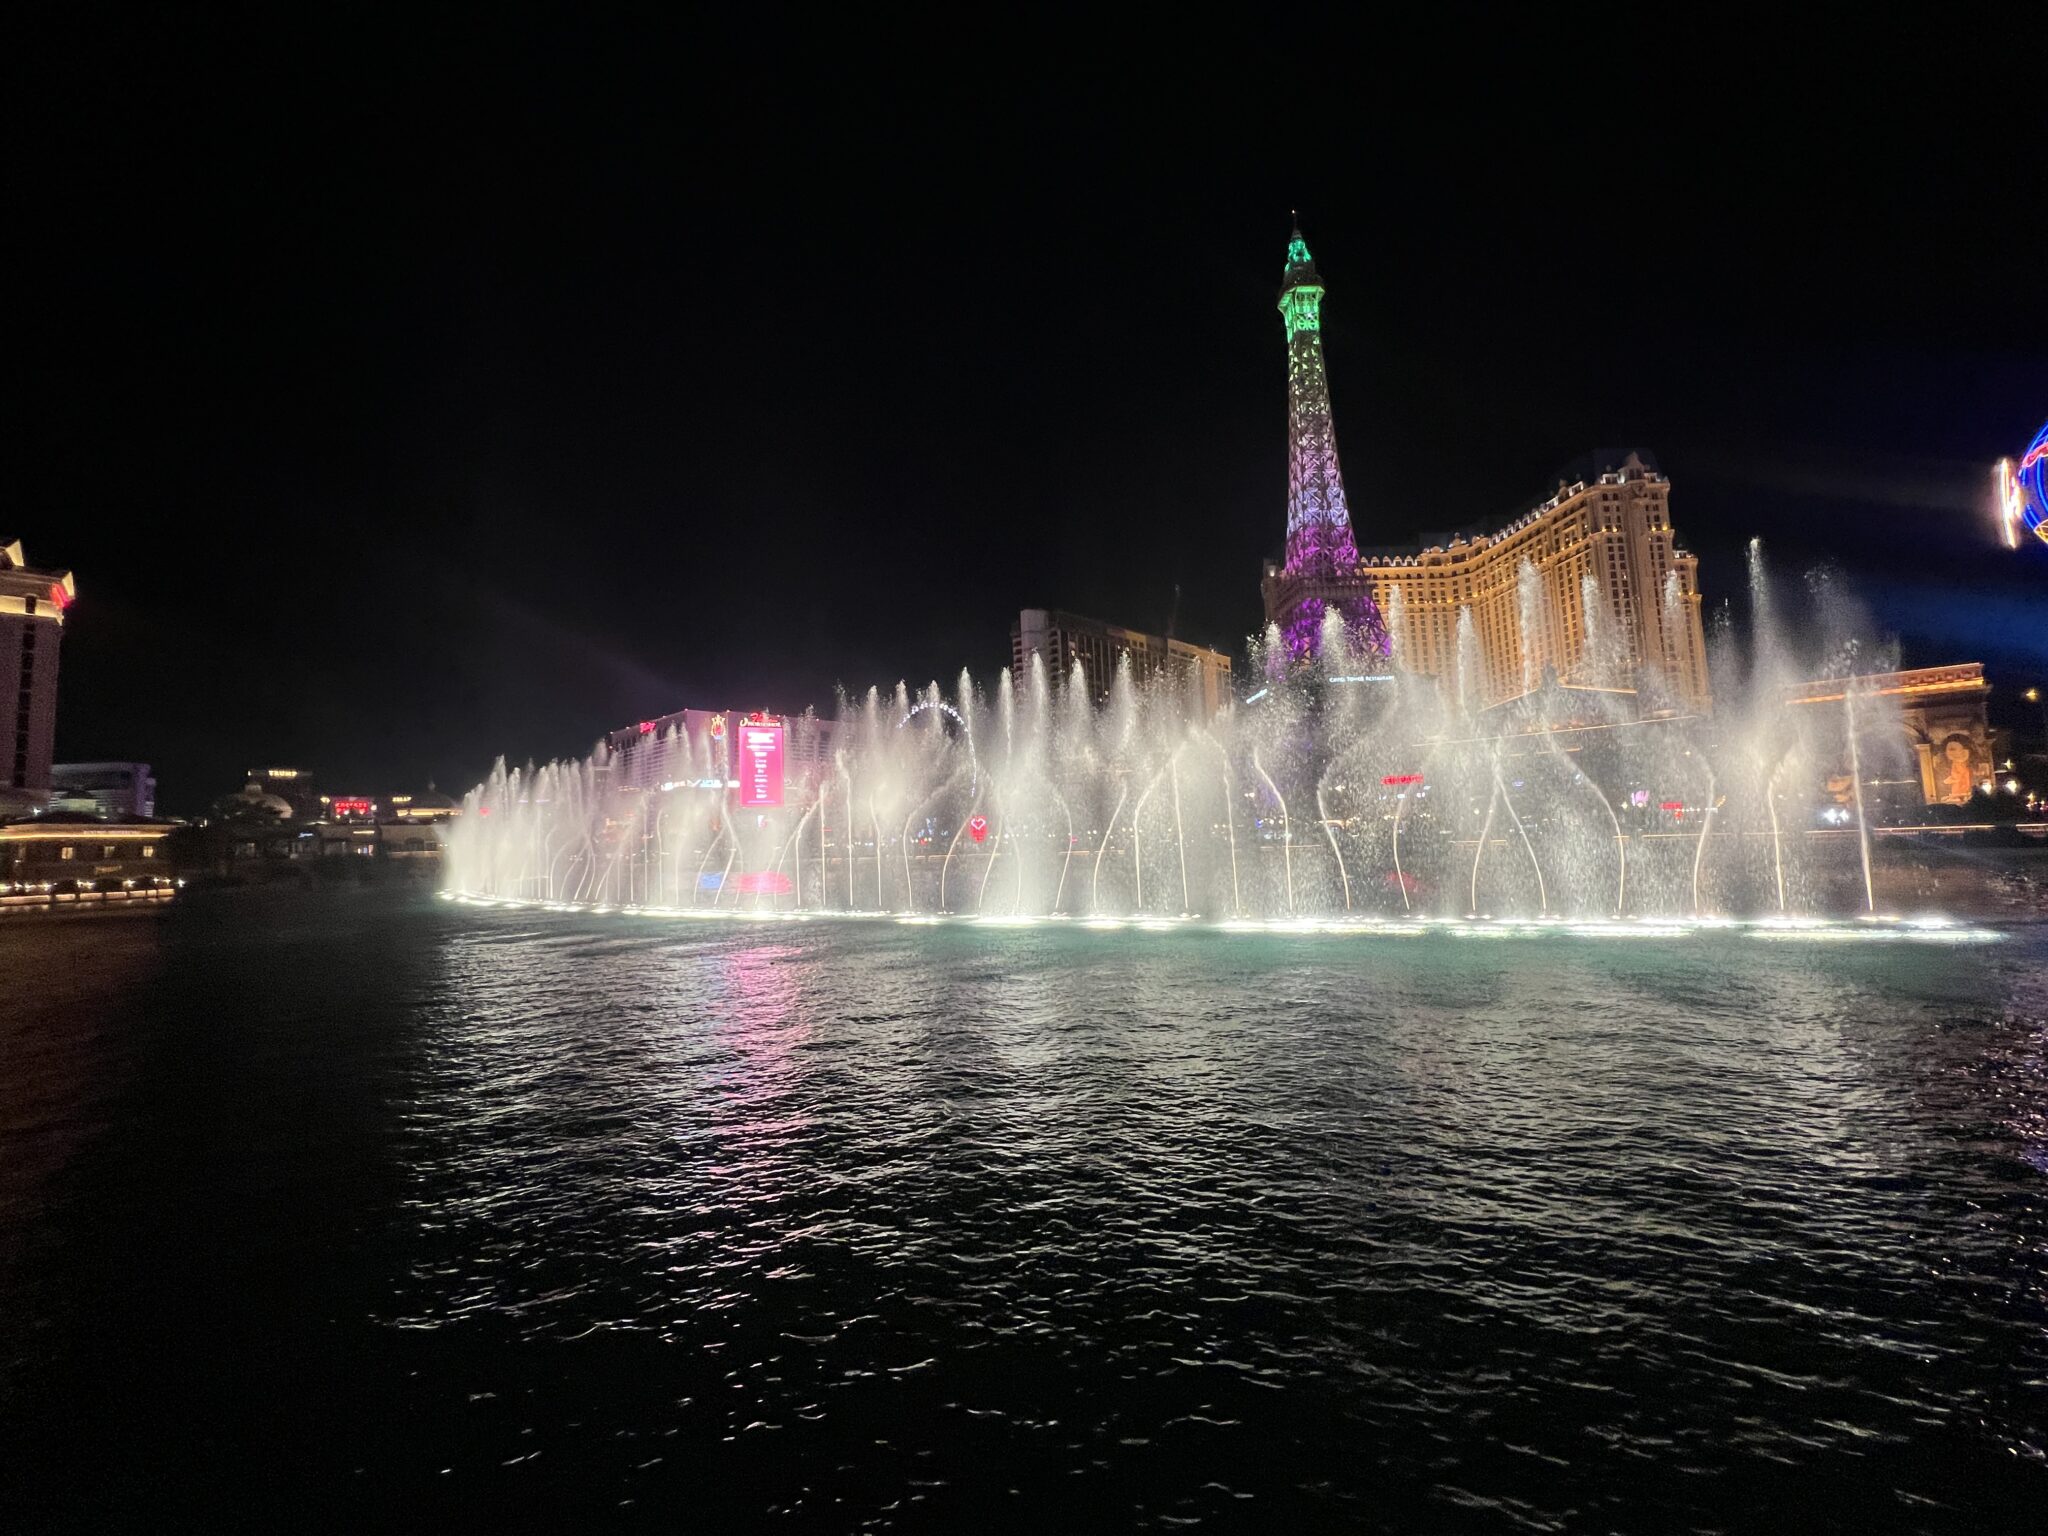 The fountains at the Bellagio at Night with Paris in background